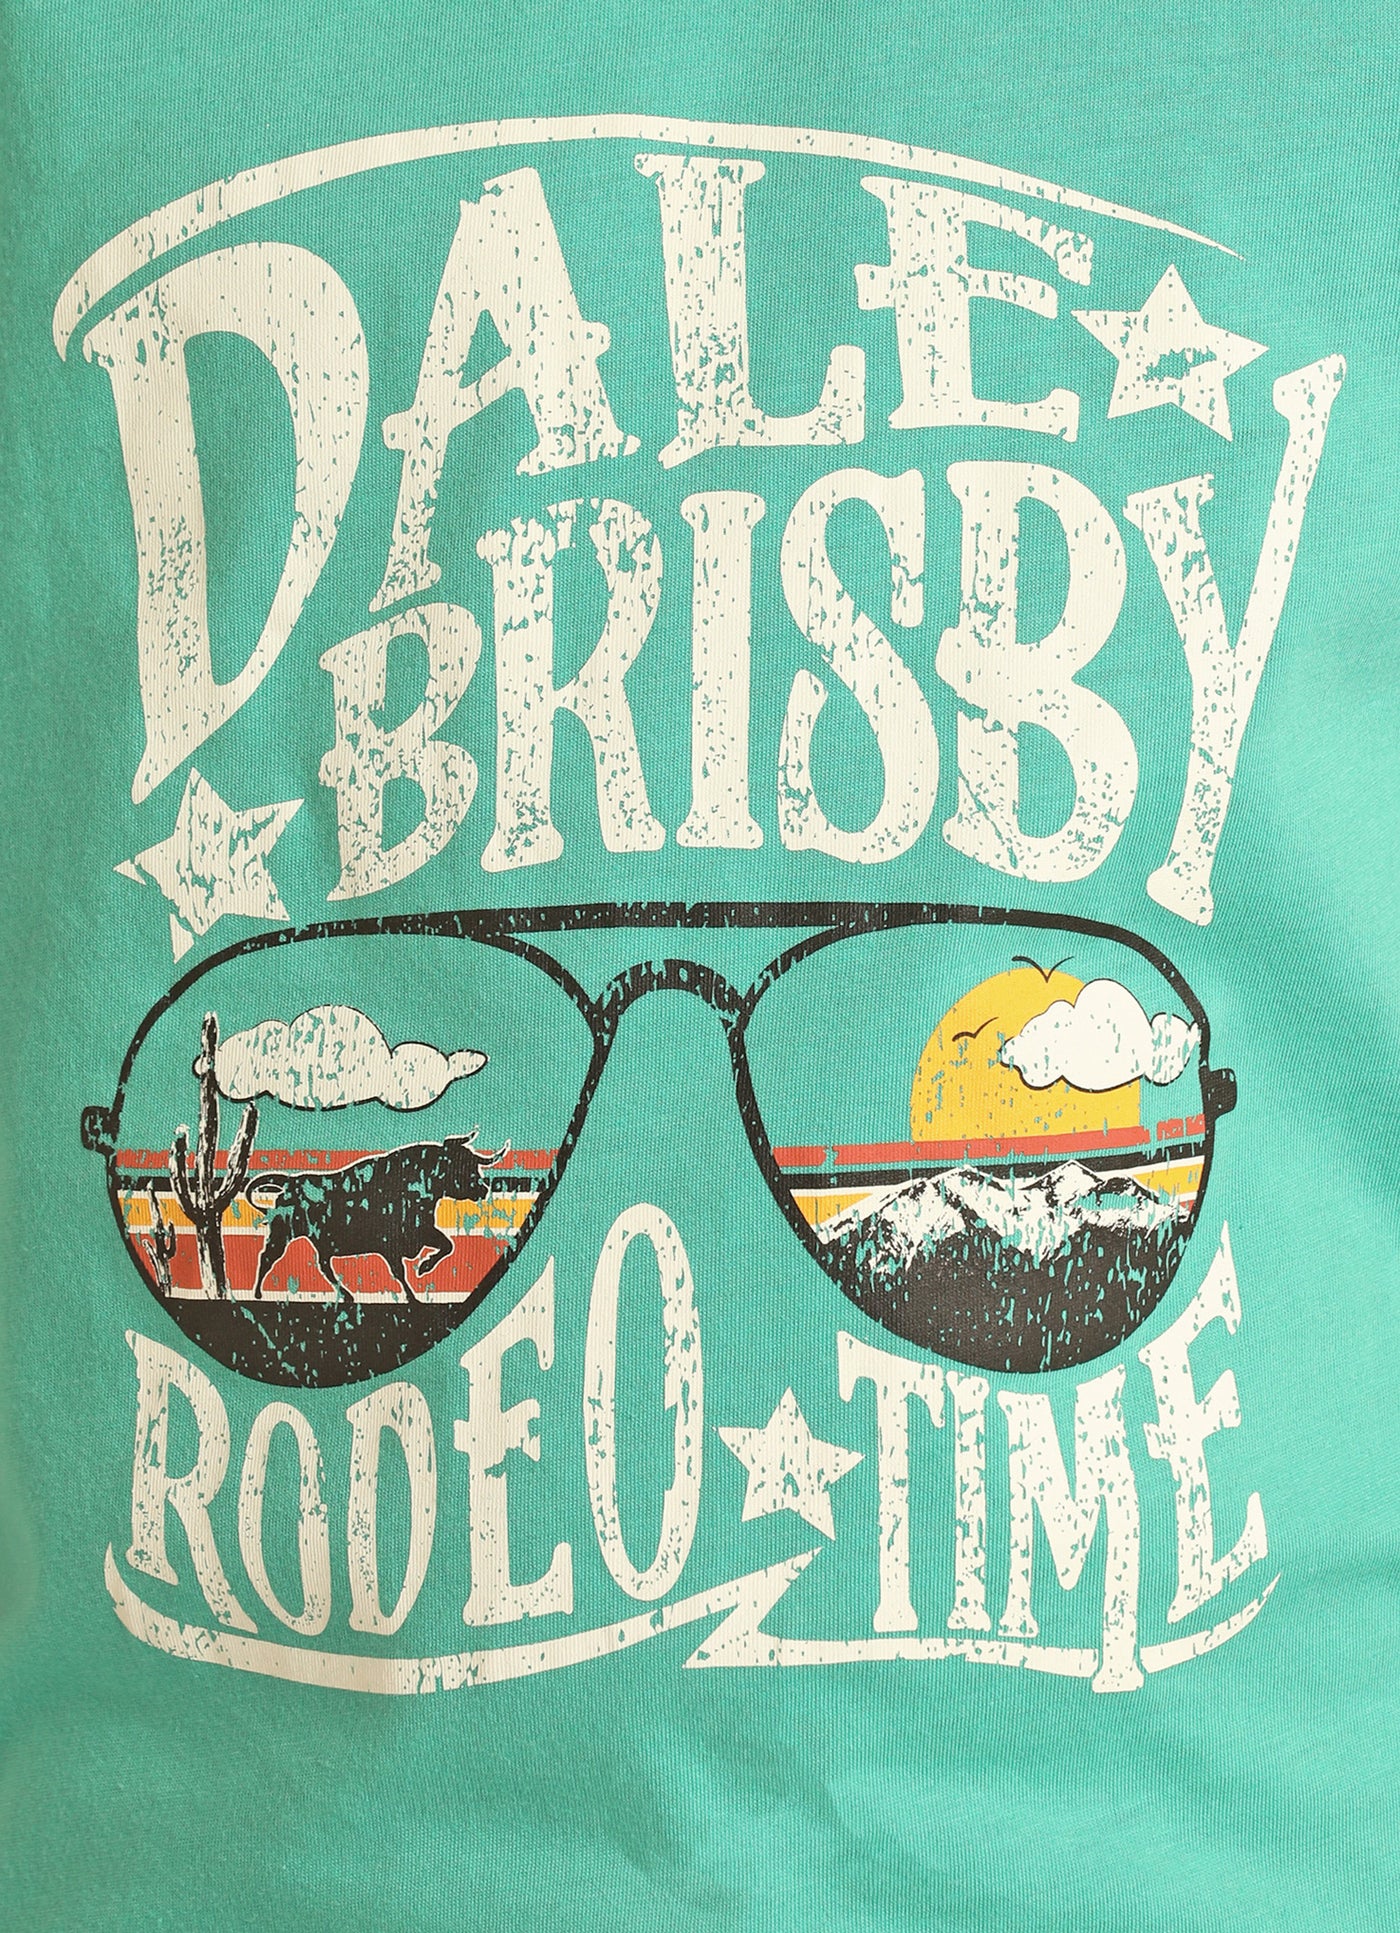 Rock & Roll Boy's Rodeo Time Sunglasses Turquoise Print T-Shirt